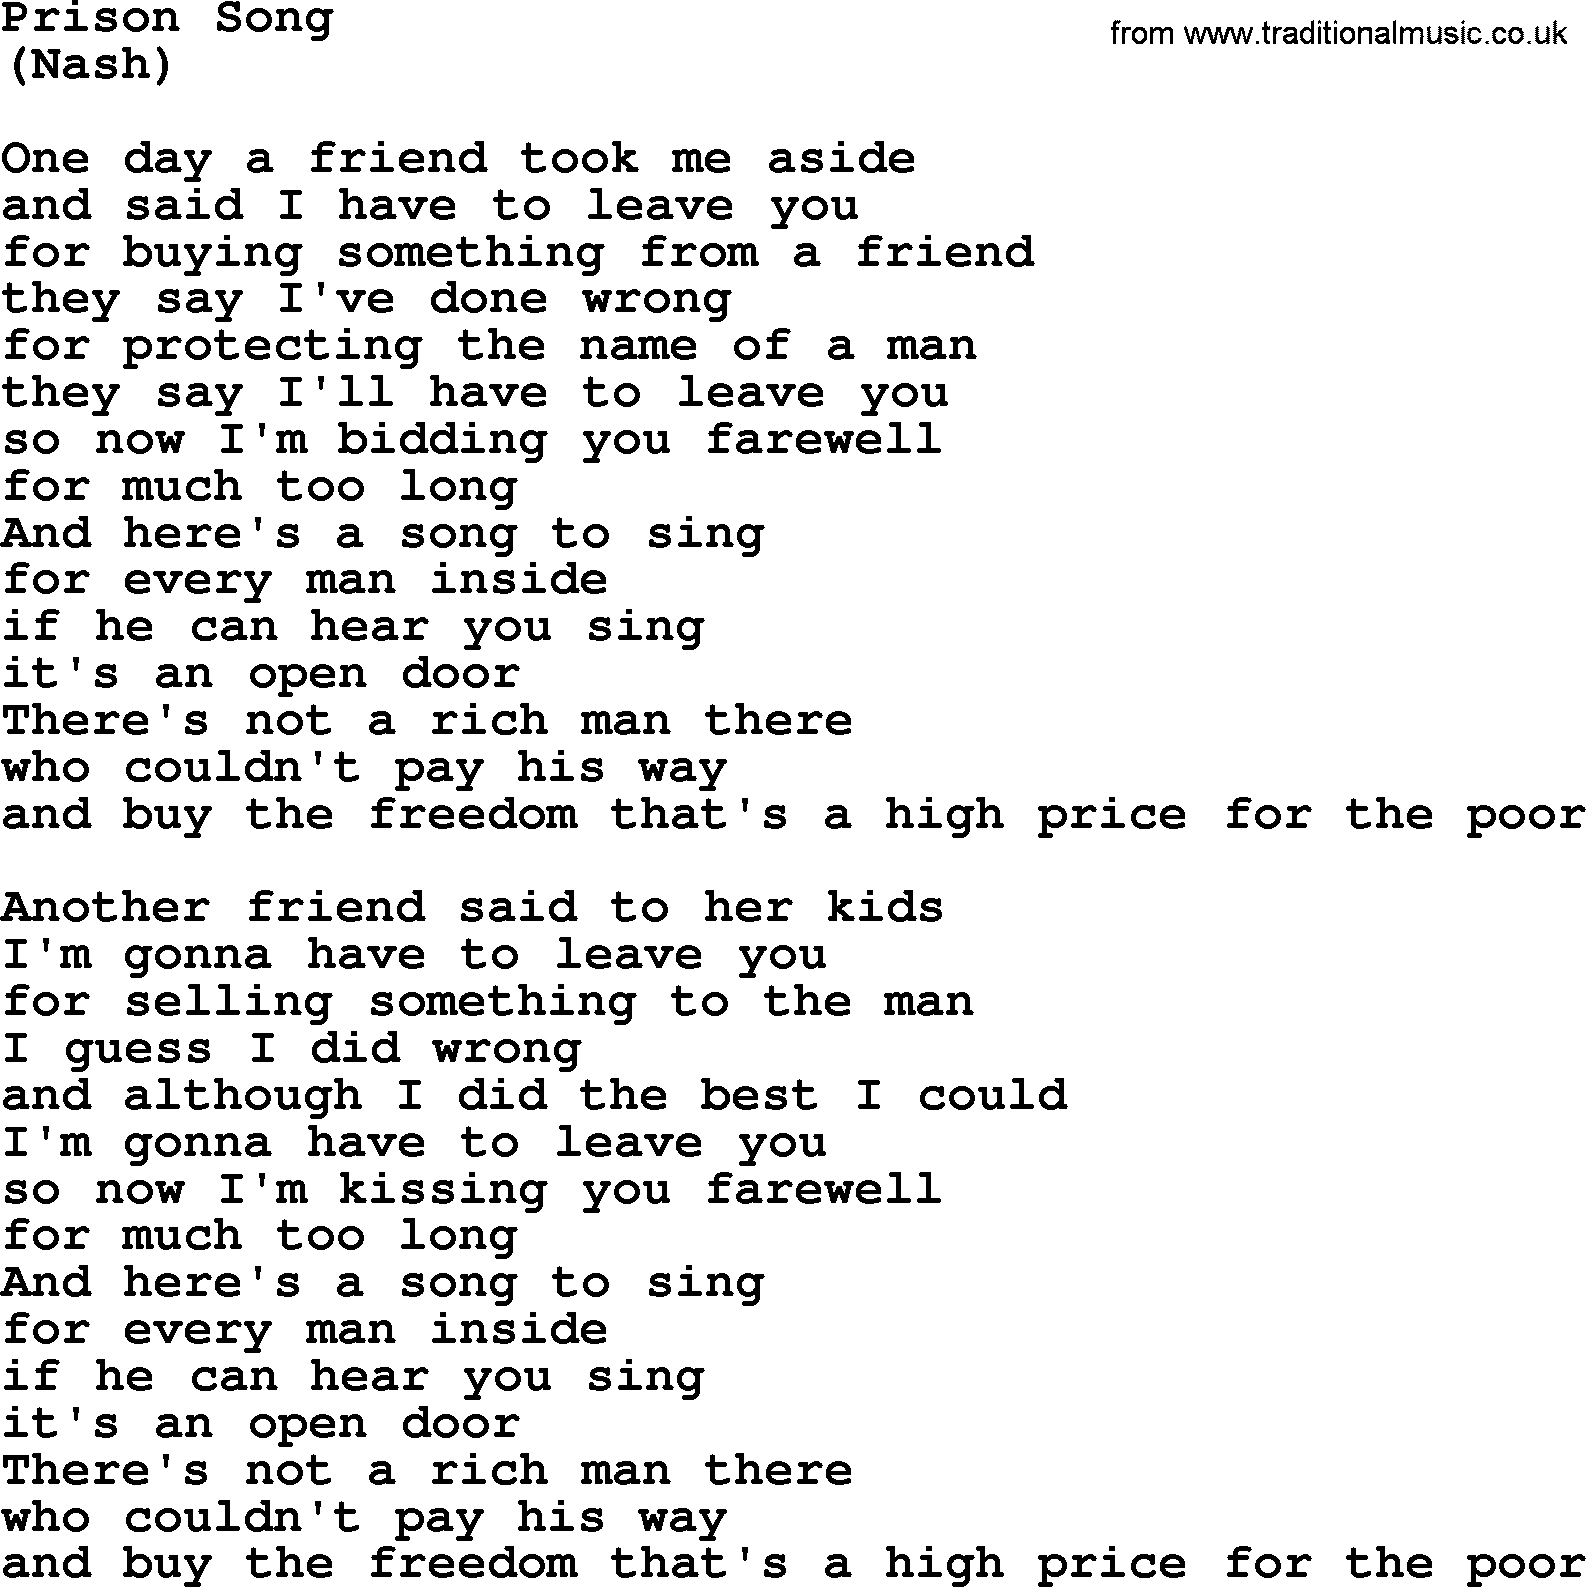 The Byrds song Prison Song, lyrics